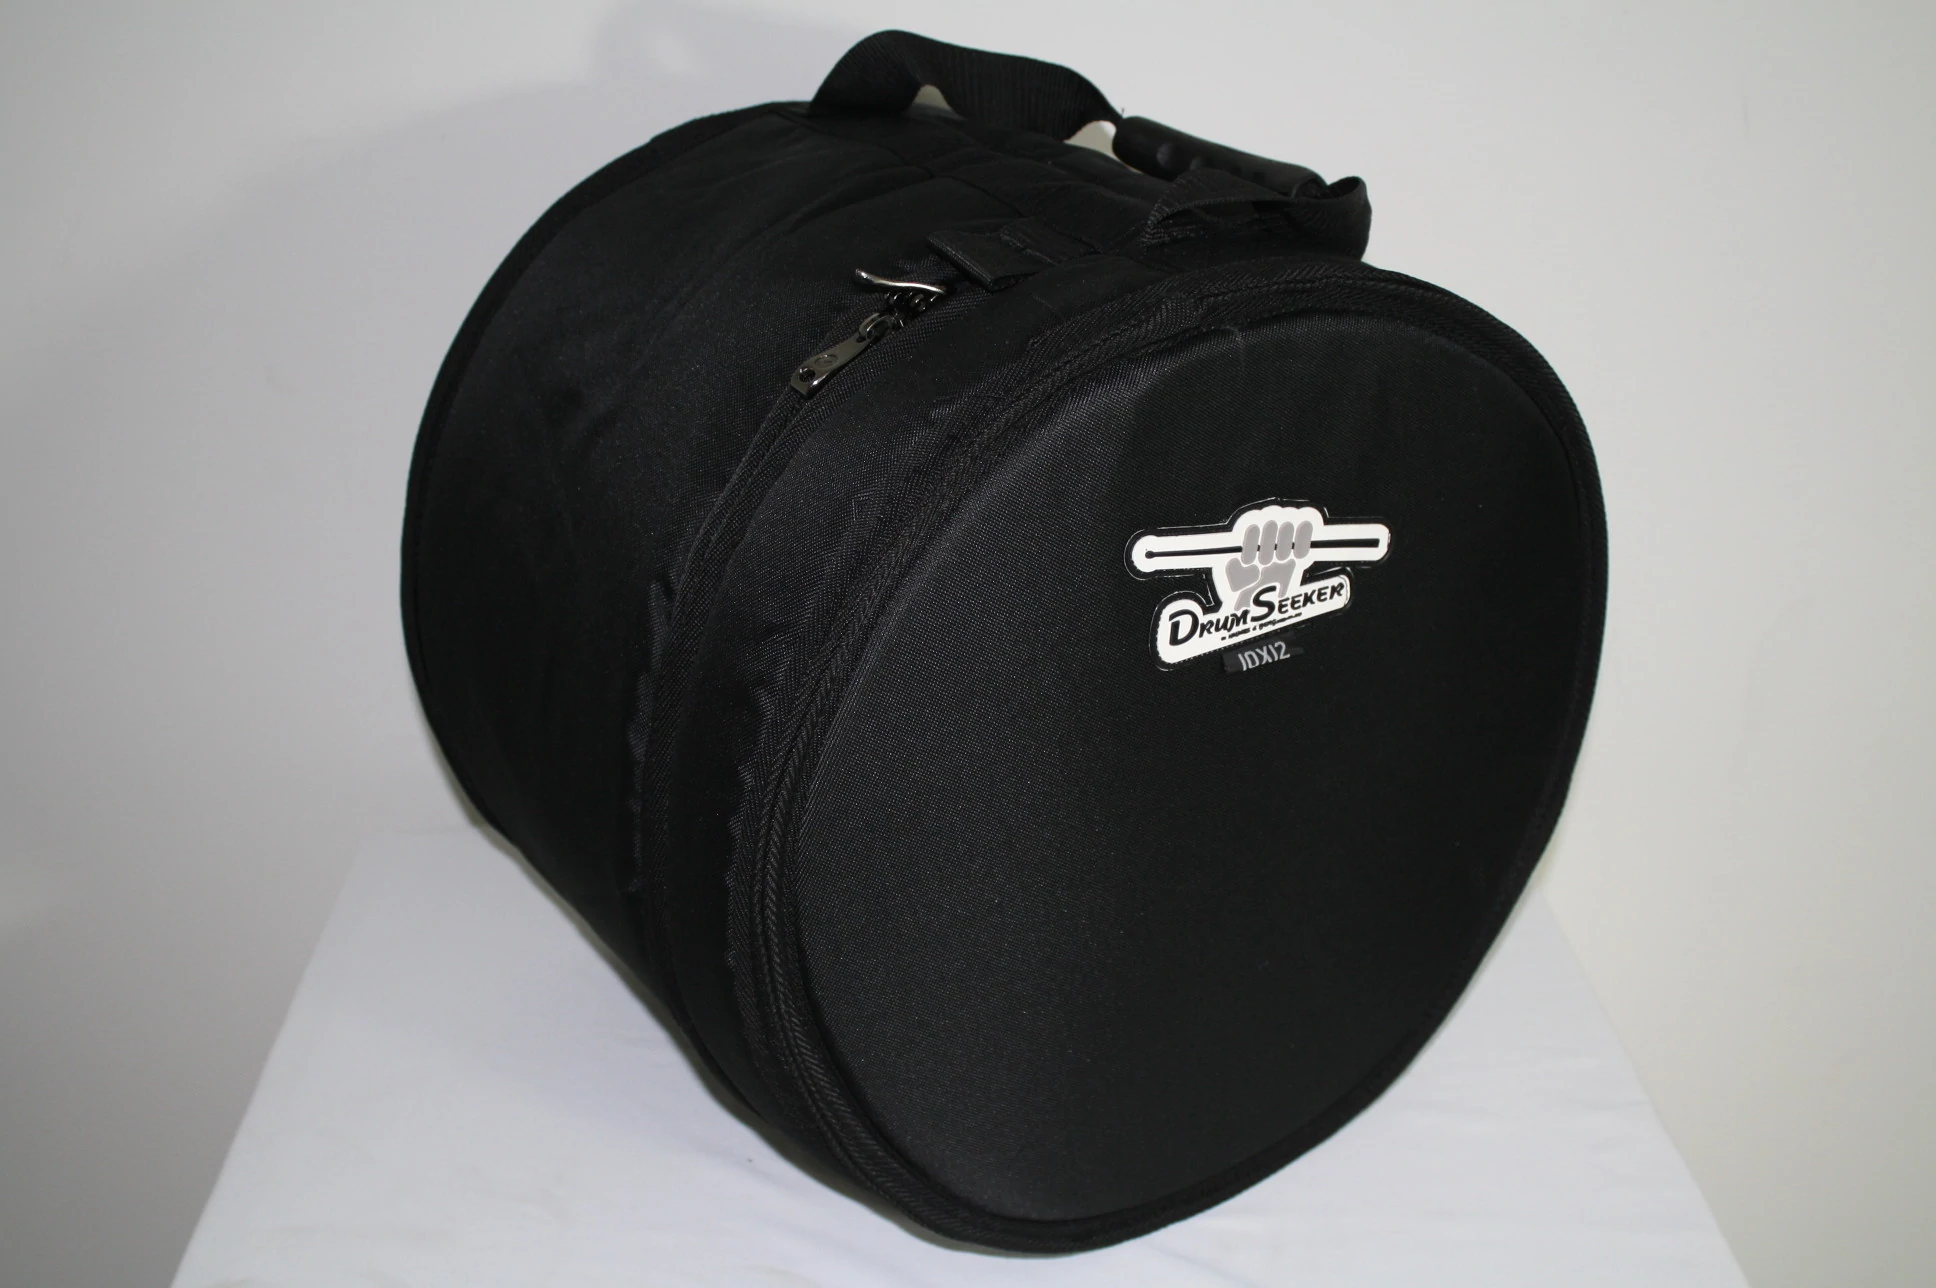 H&B Drum Seeker 7 x 13 Inches Snare Drum Bag